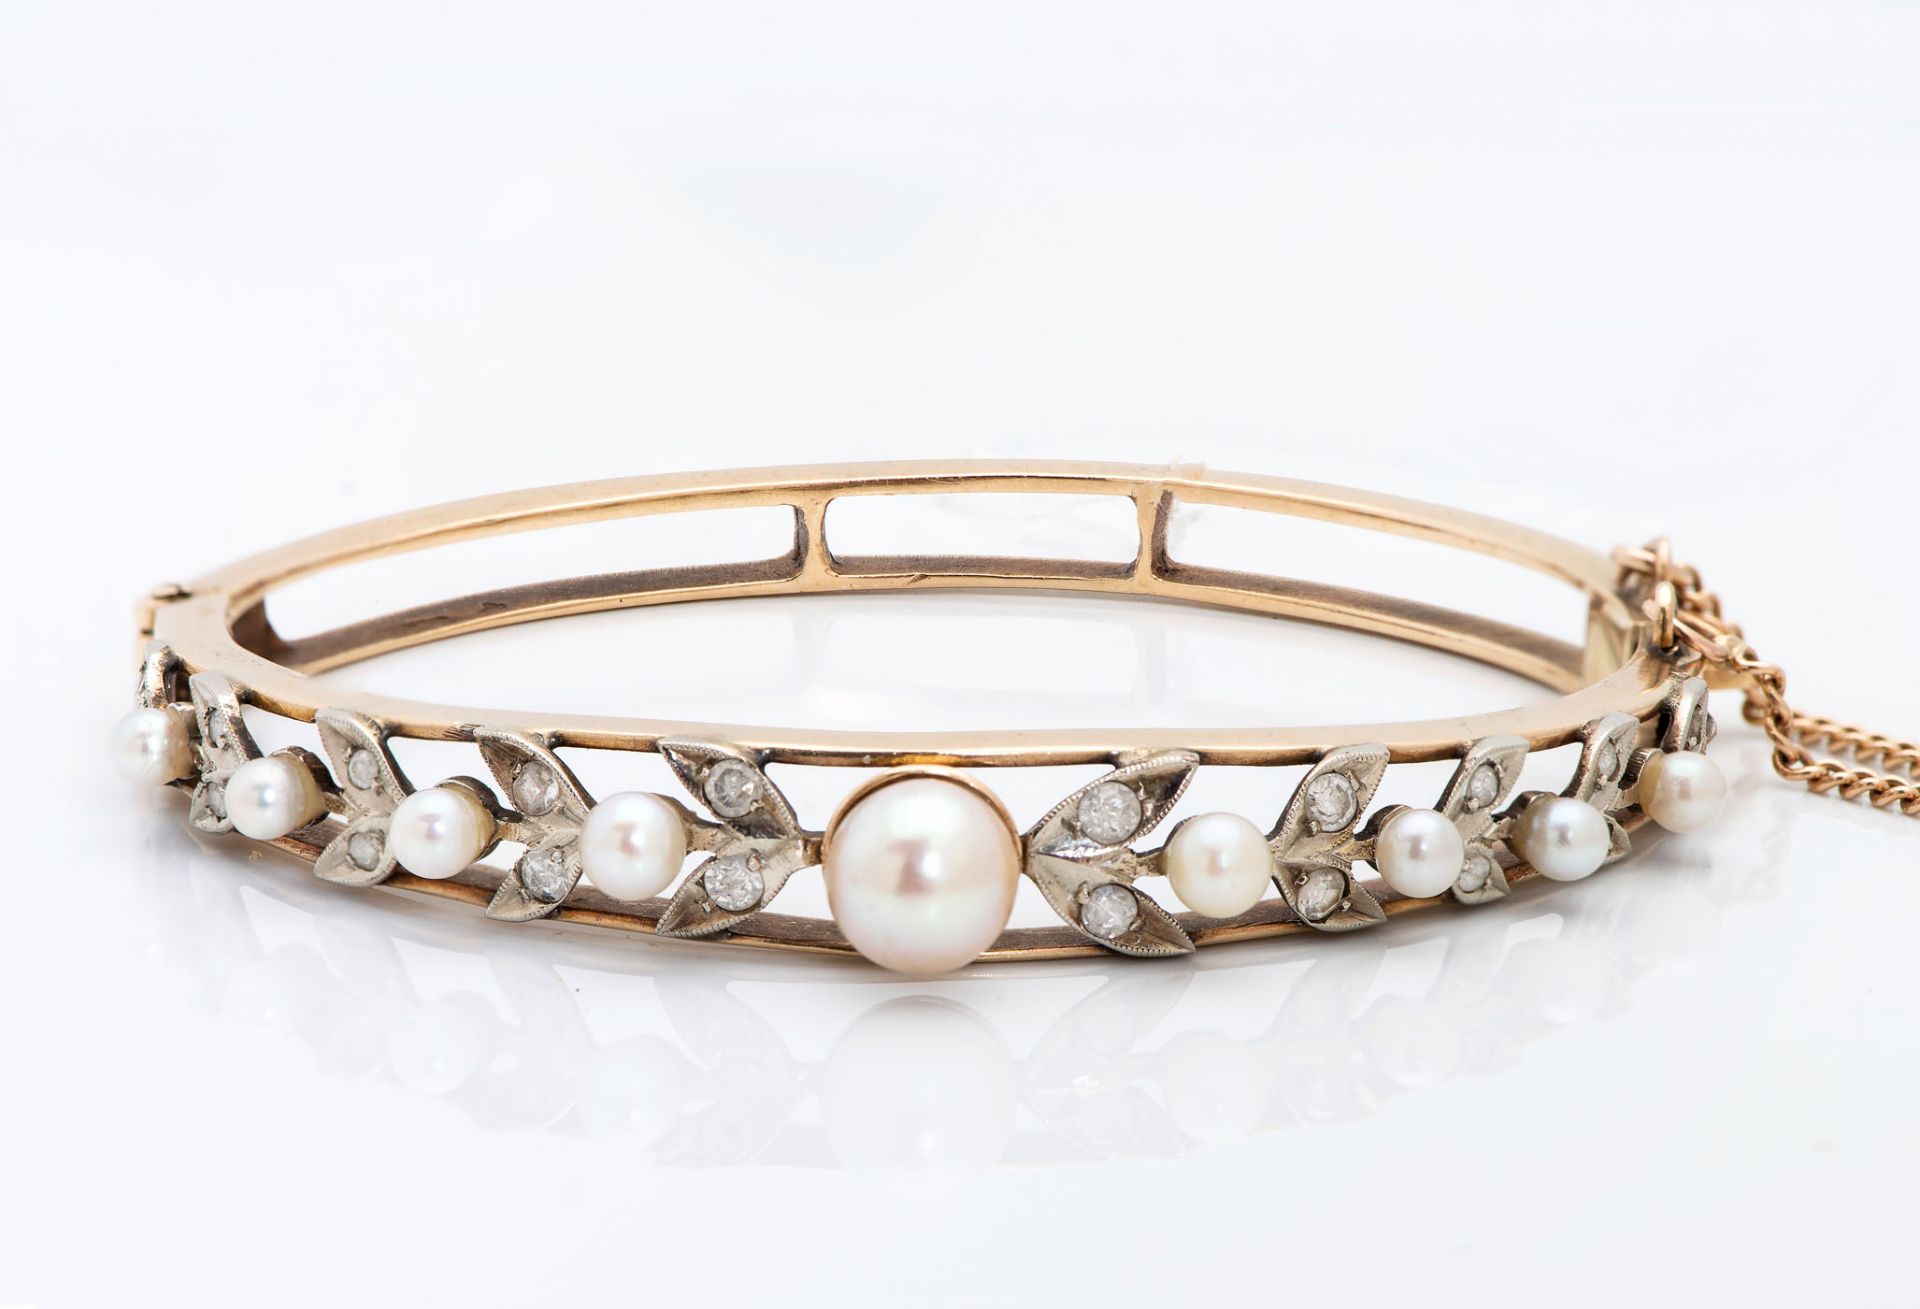 A Victorian 15K Two Tone Gold Pearls and Diamond Bangle - Image 2 of 2